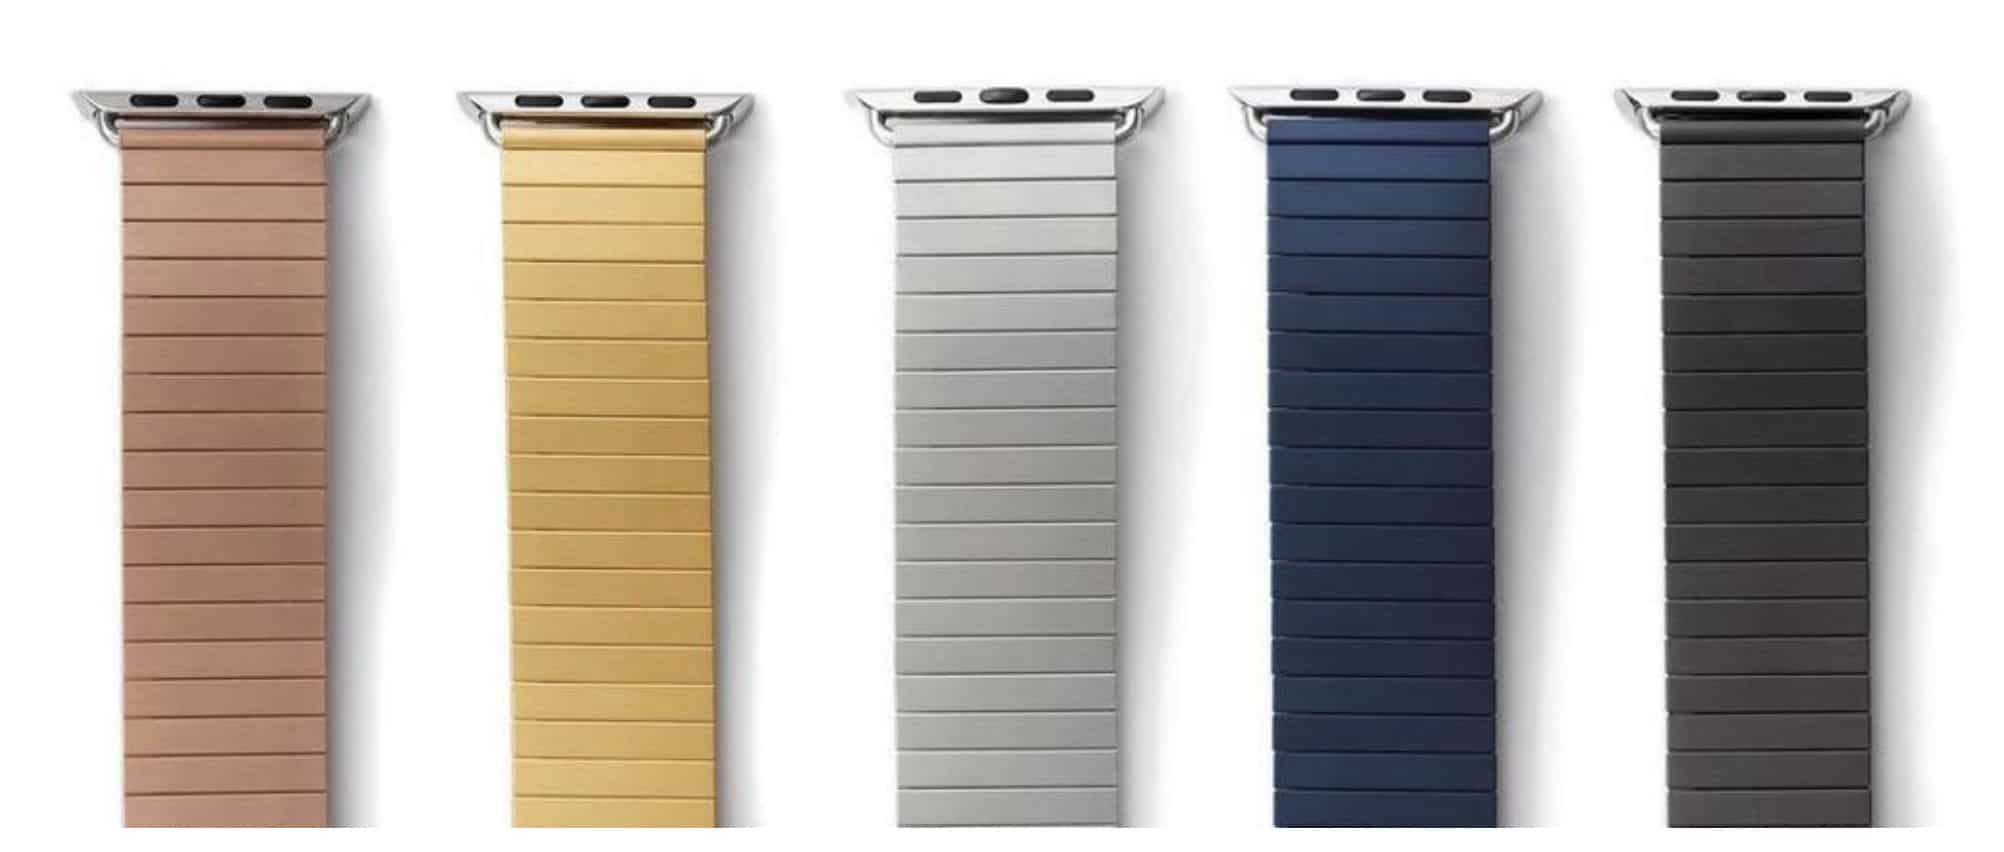 Rilee & Lo Apple watch band colors: rose gold, gold, silver, navy, black